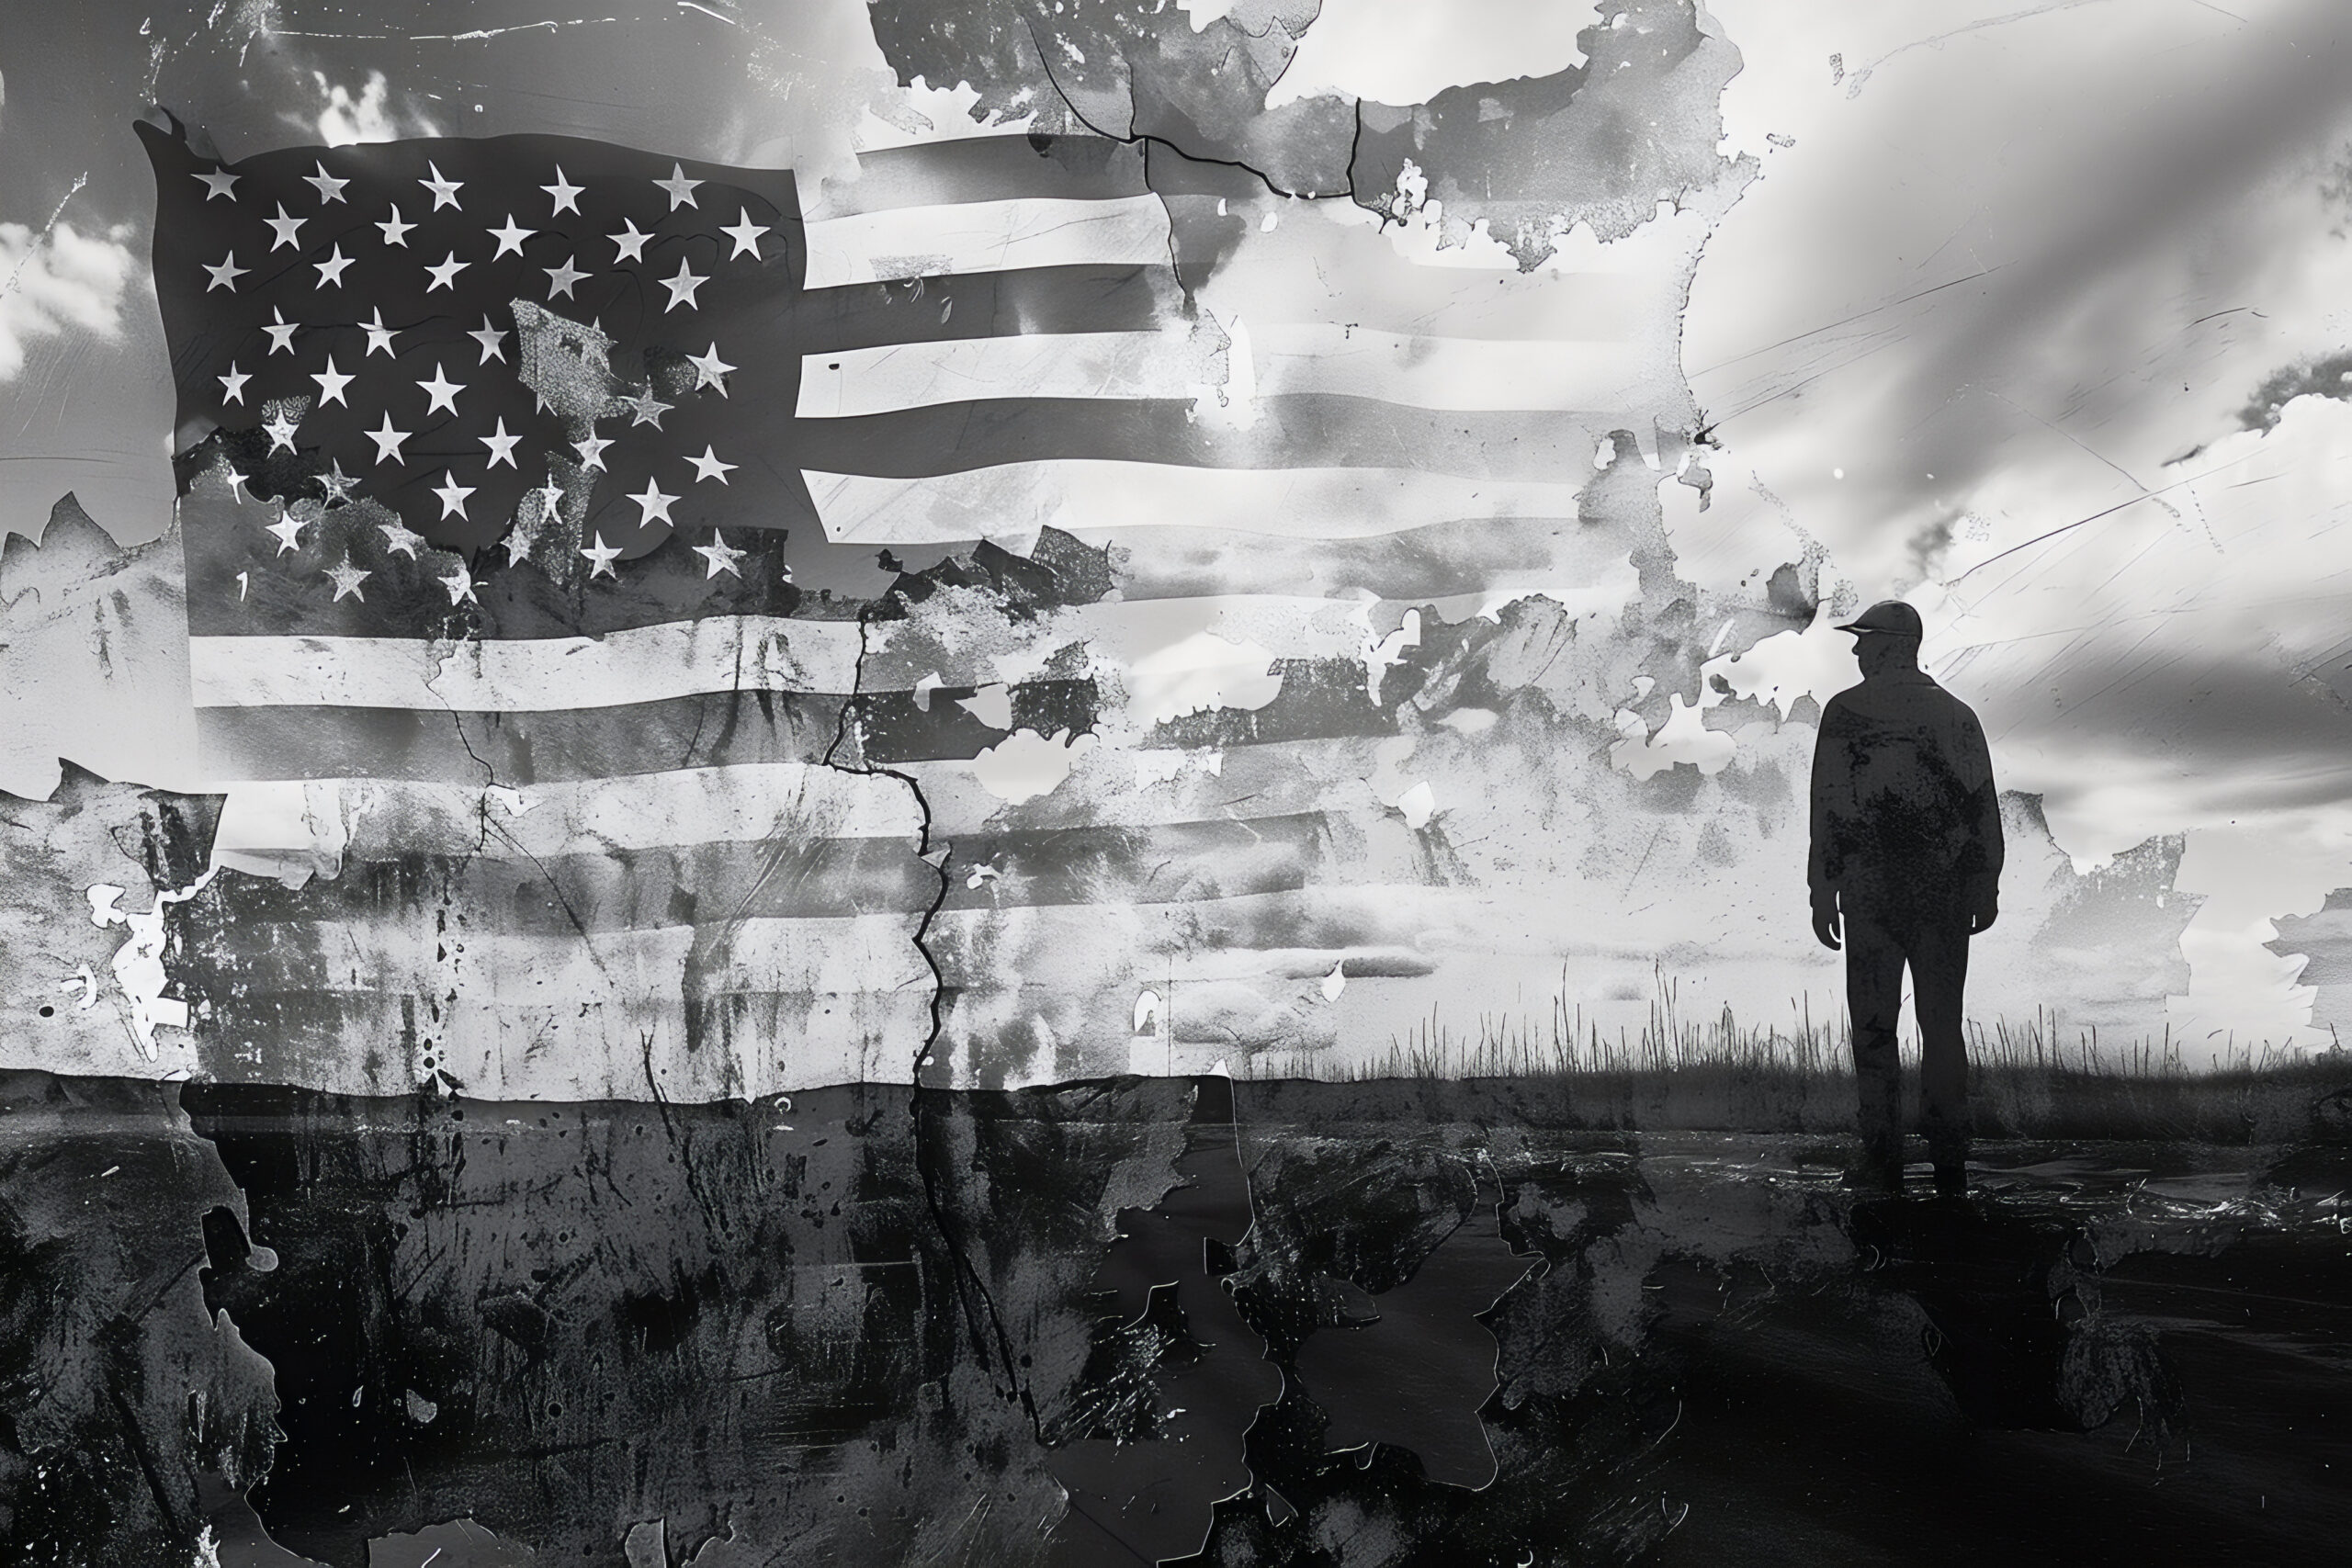 Silhouette of a Person in Desolate Black and White Landscape with American Flag in the Sky